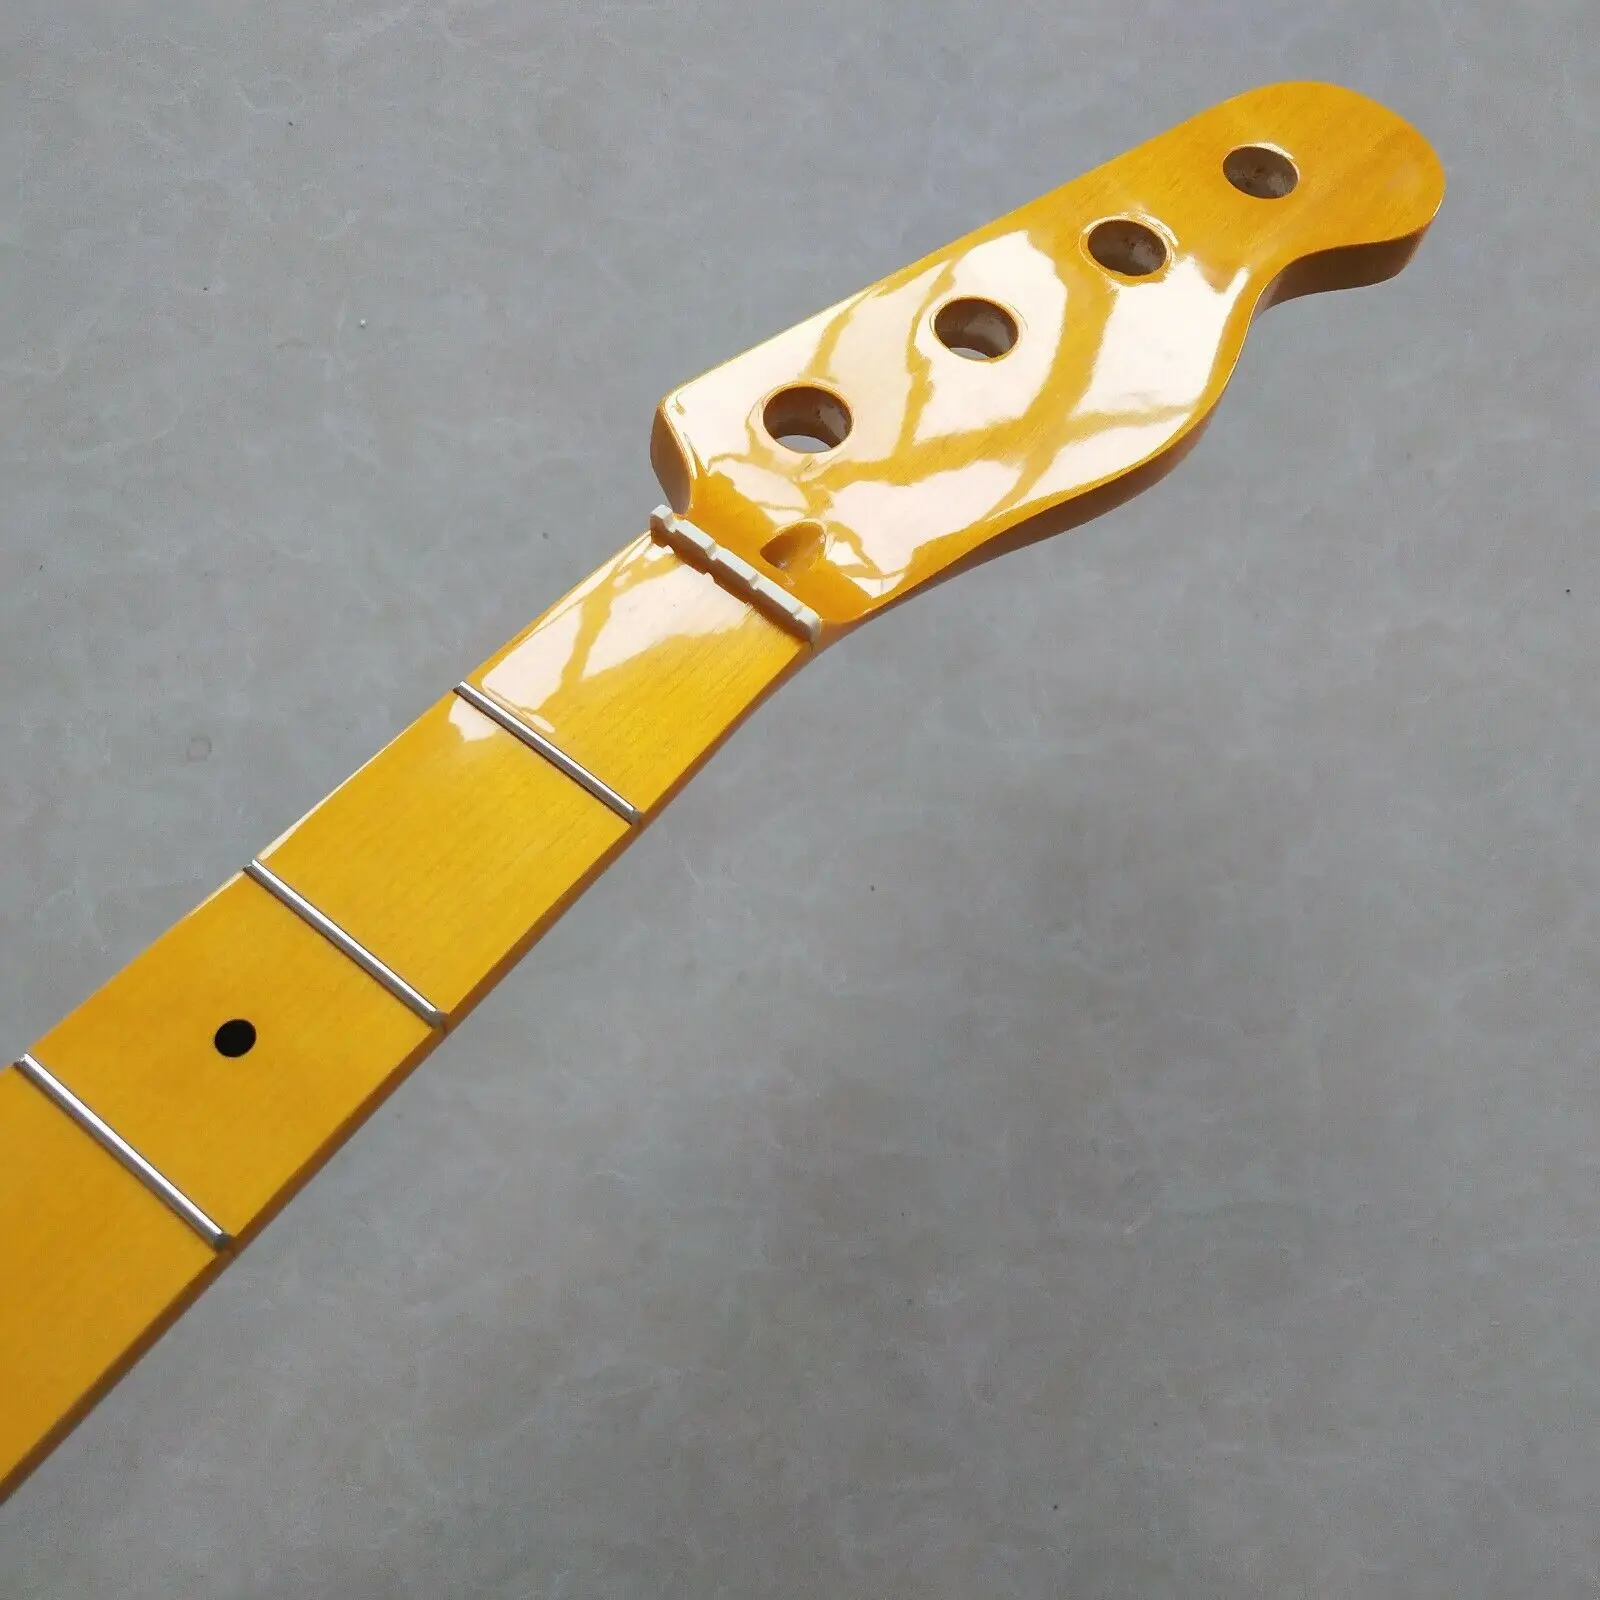 New Gloss Jazz bass guitar neck parts 20 fret 34 inch Maple Fretboard dots Inlay